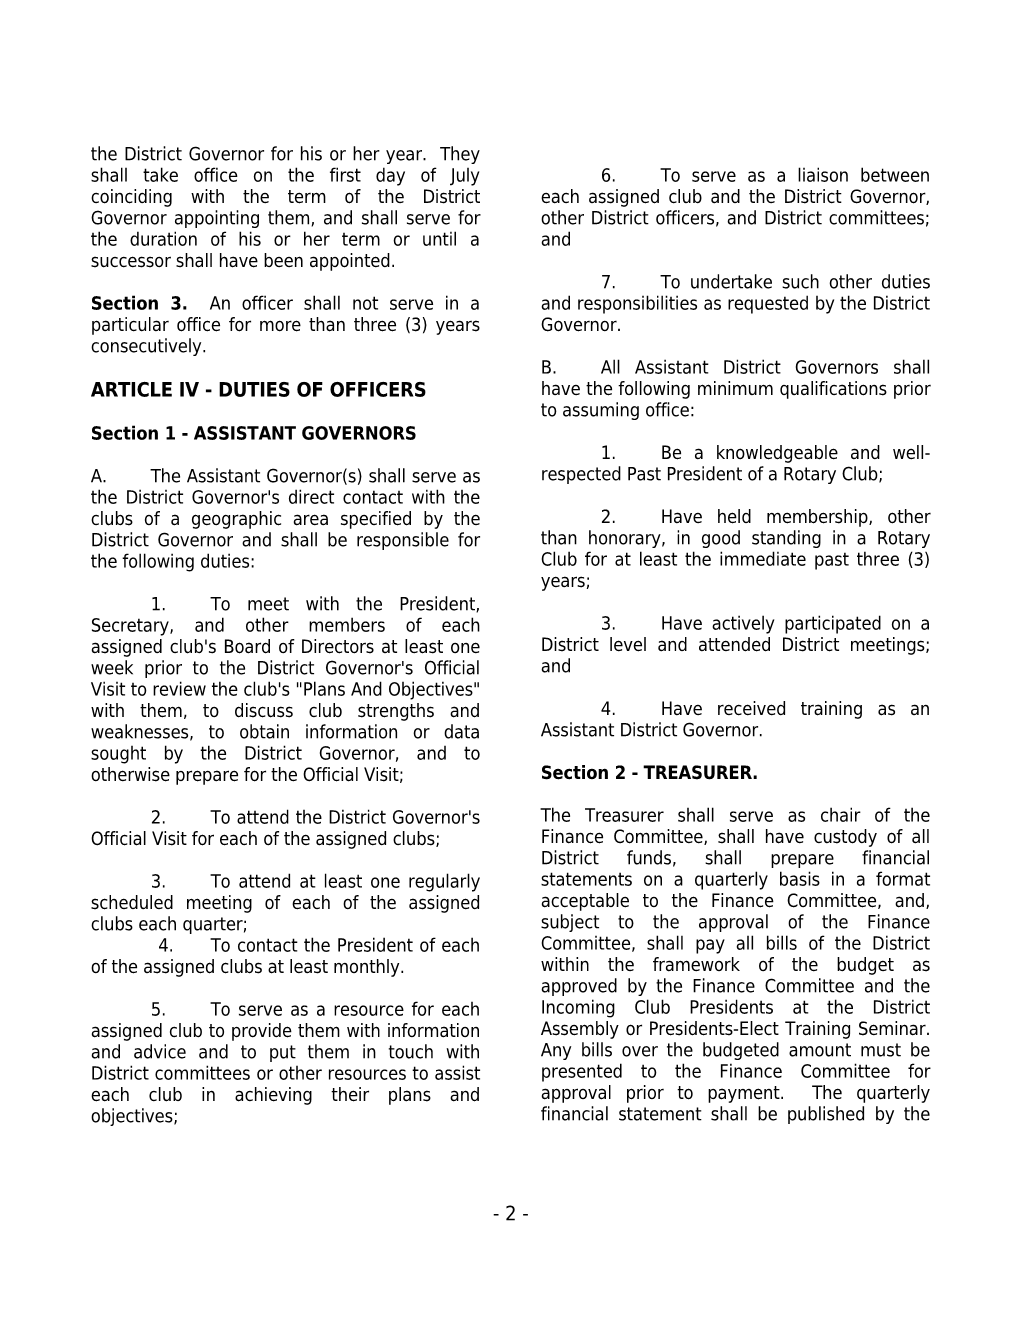 Rotary District 7300 Articles of Procedure (6/28/2014) (D0372041;1)